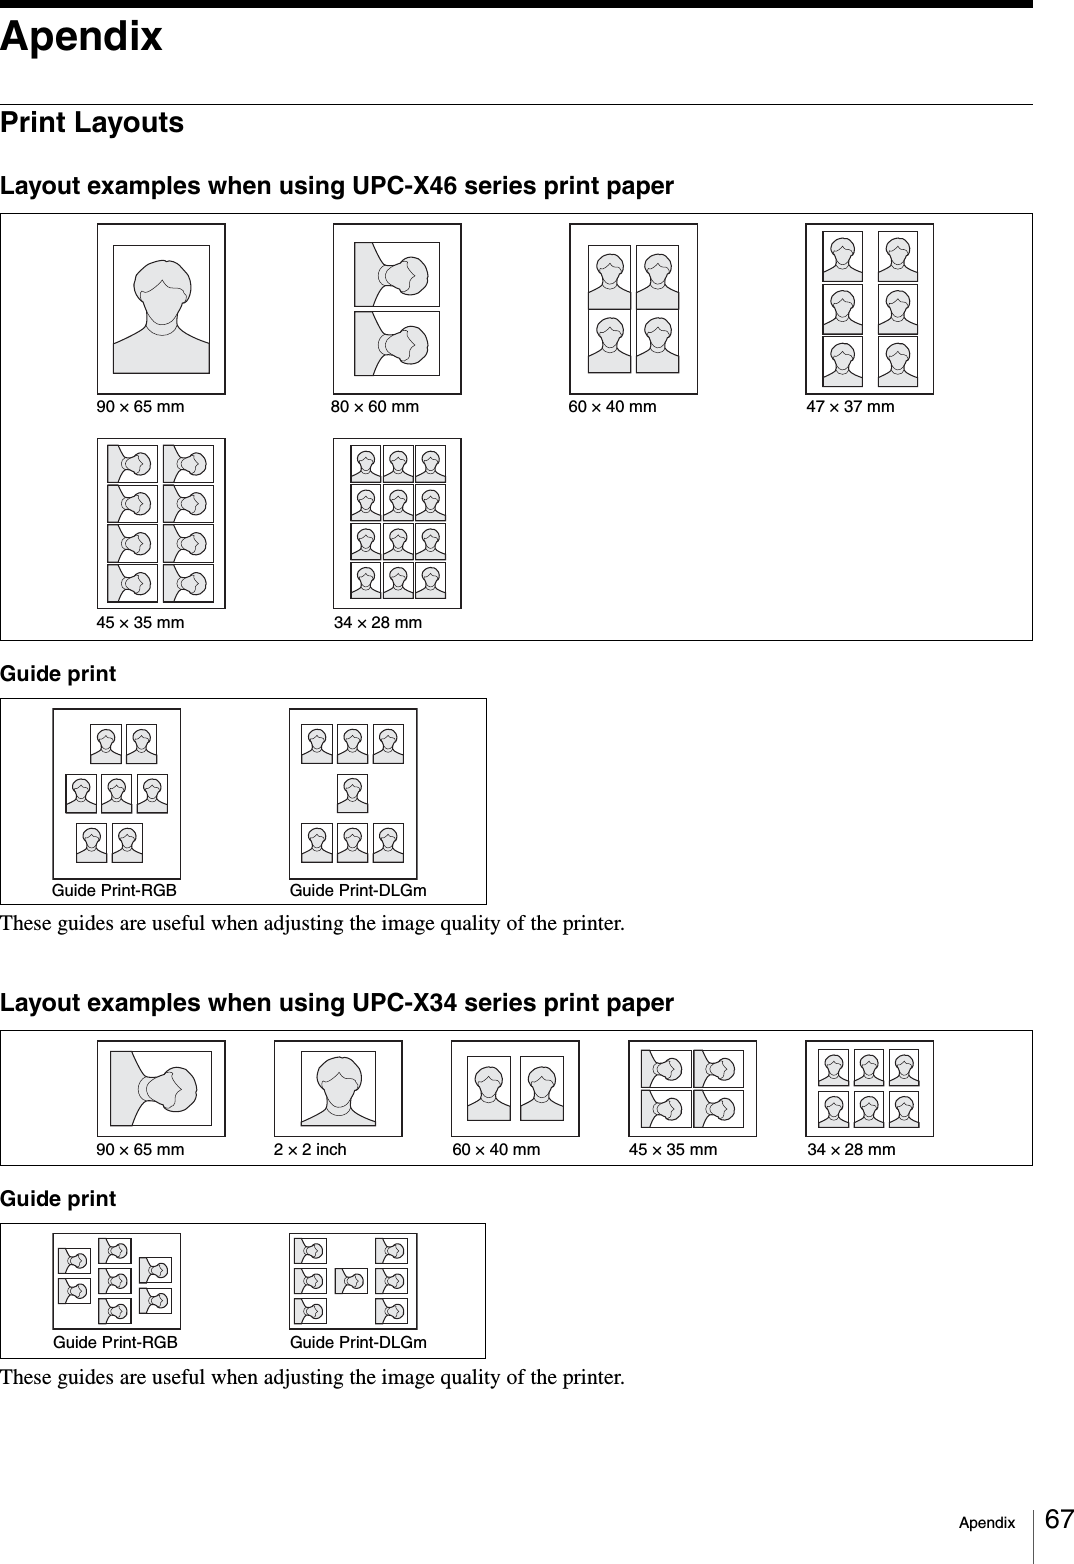 Apendix 67ApendixPrint LayoutsLayout examples when using UPC-X46 series print paperGuide printThese guides are useful when adjusting the image quality of the printer.Layout examples when using UPC-X34 series print paperGuide printThese guides are useful when adjusting the image quality of the printer.90 × 65 mm  80 × 60 mm 60 × 40 mm 47 × 37 mm45 × 35 mm 34 × 28 mmGuide Print-DLGmGuide Print-RGB60 × 40 mm 45 × 35 mm 34 × 28 mm90 × 65 mm 2 × 2 inchGuide Print-DLGmGuide Print-RGB